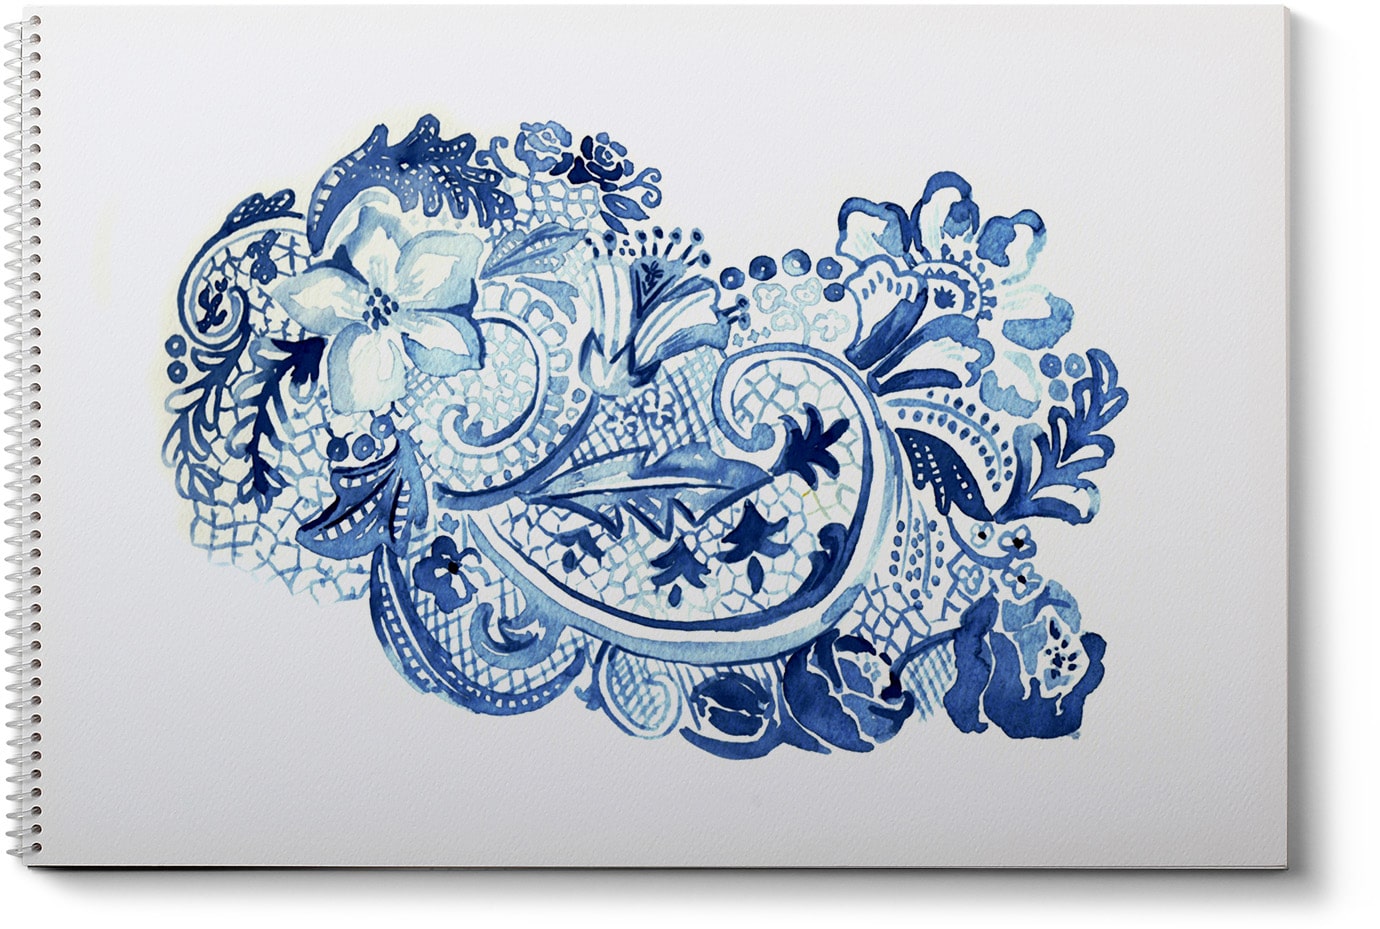 Blue and white watercolor painting